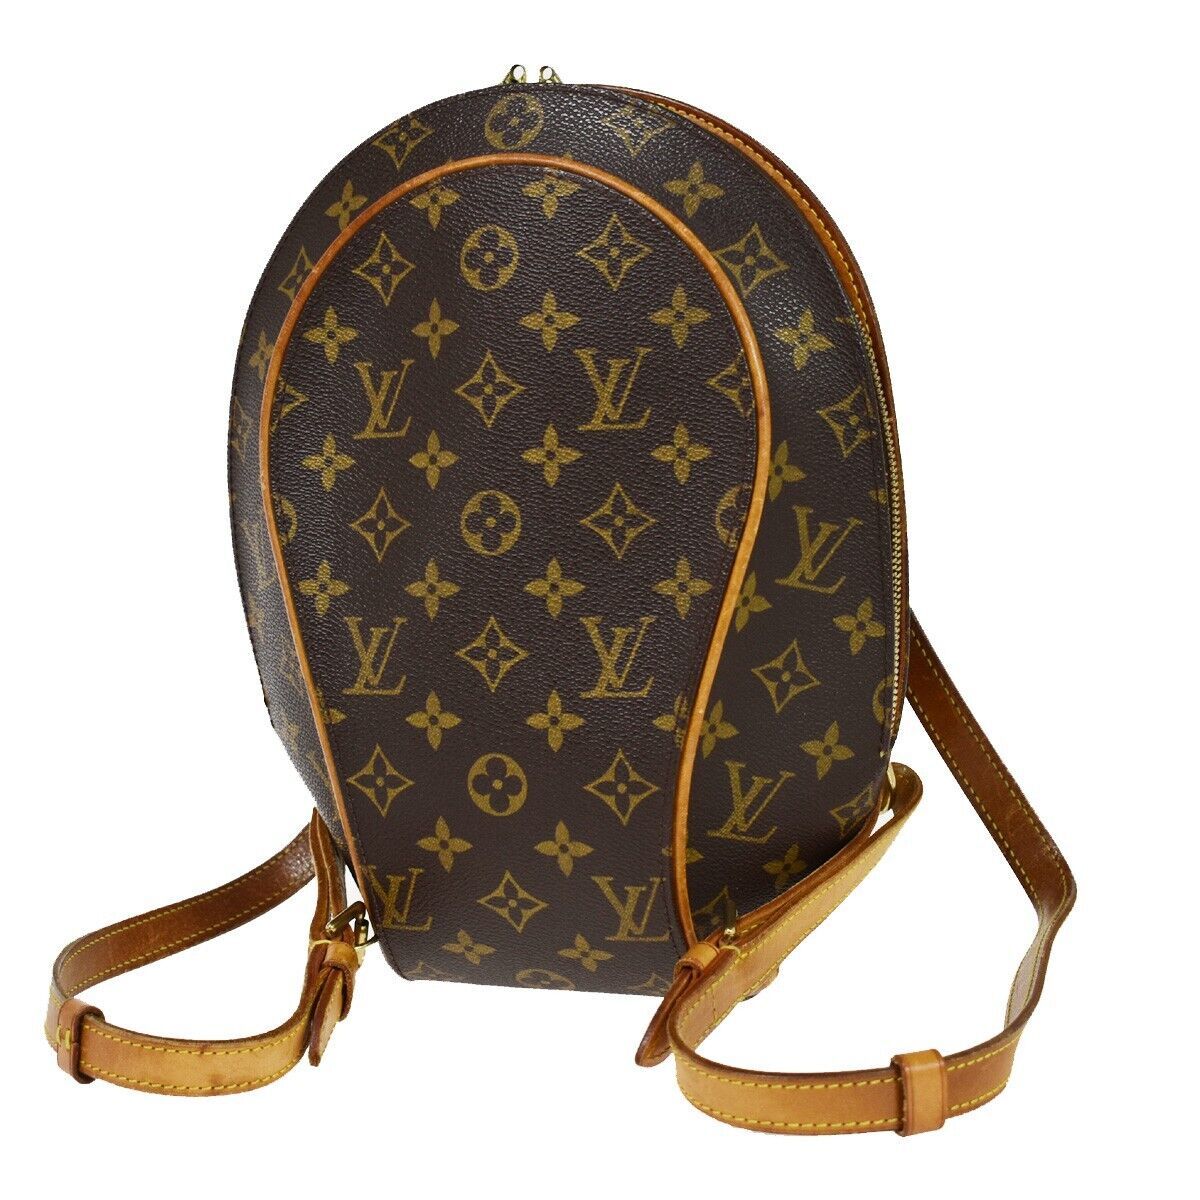 LOUIS VUITTON LV SHW Discovery Backpack Rucksack M46553 Monogram